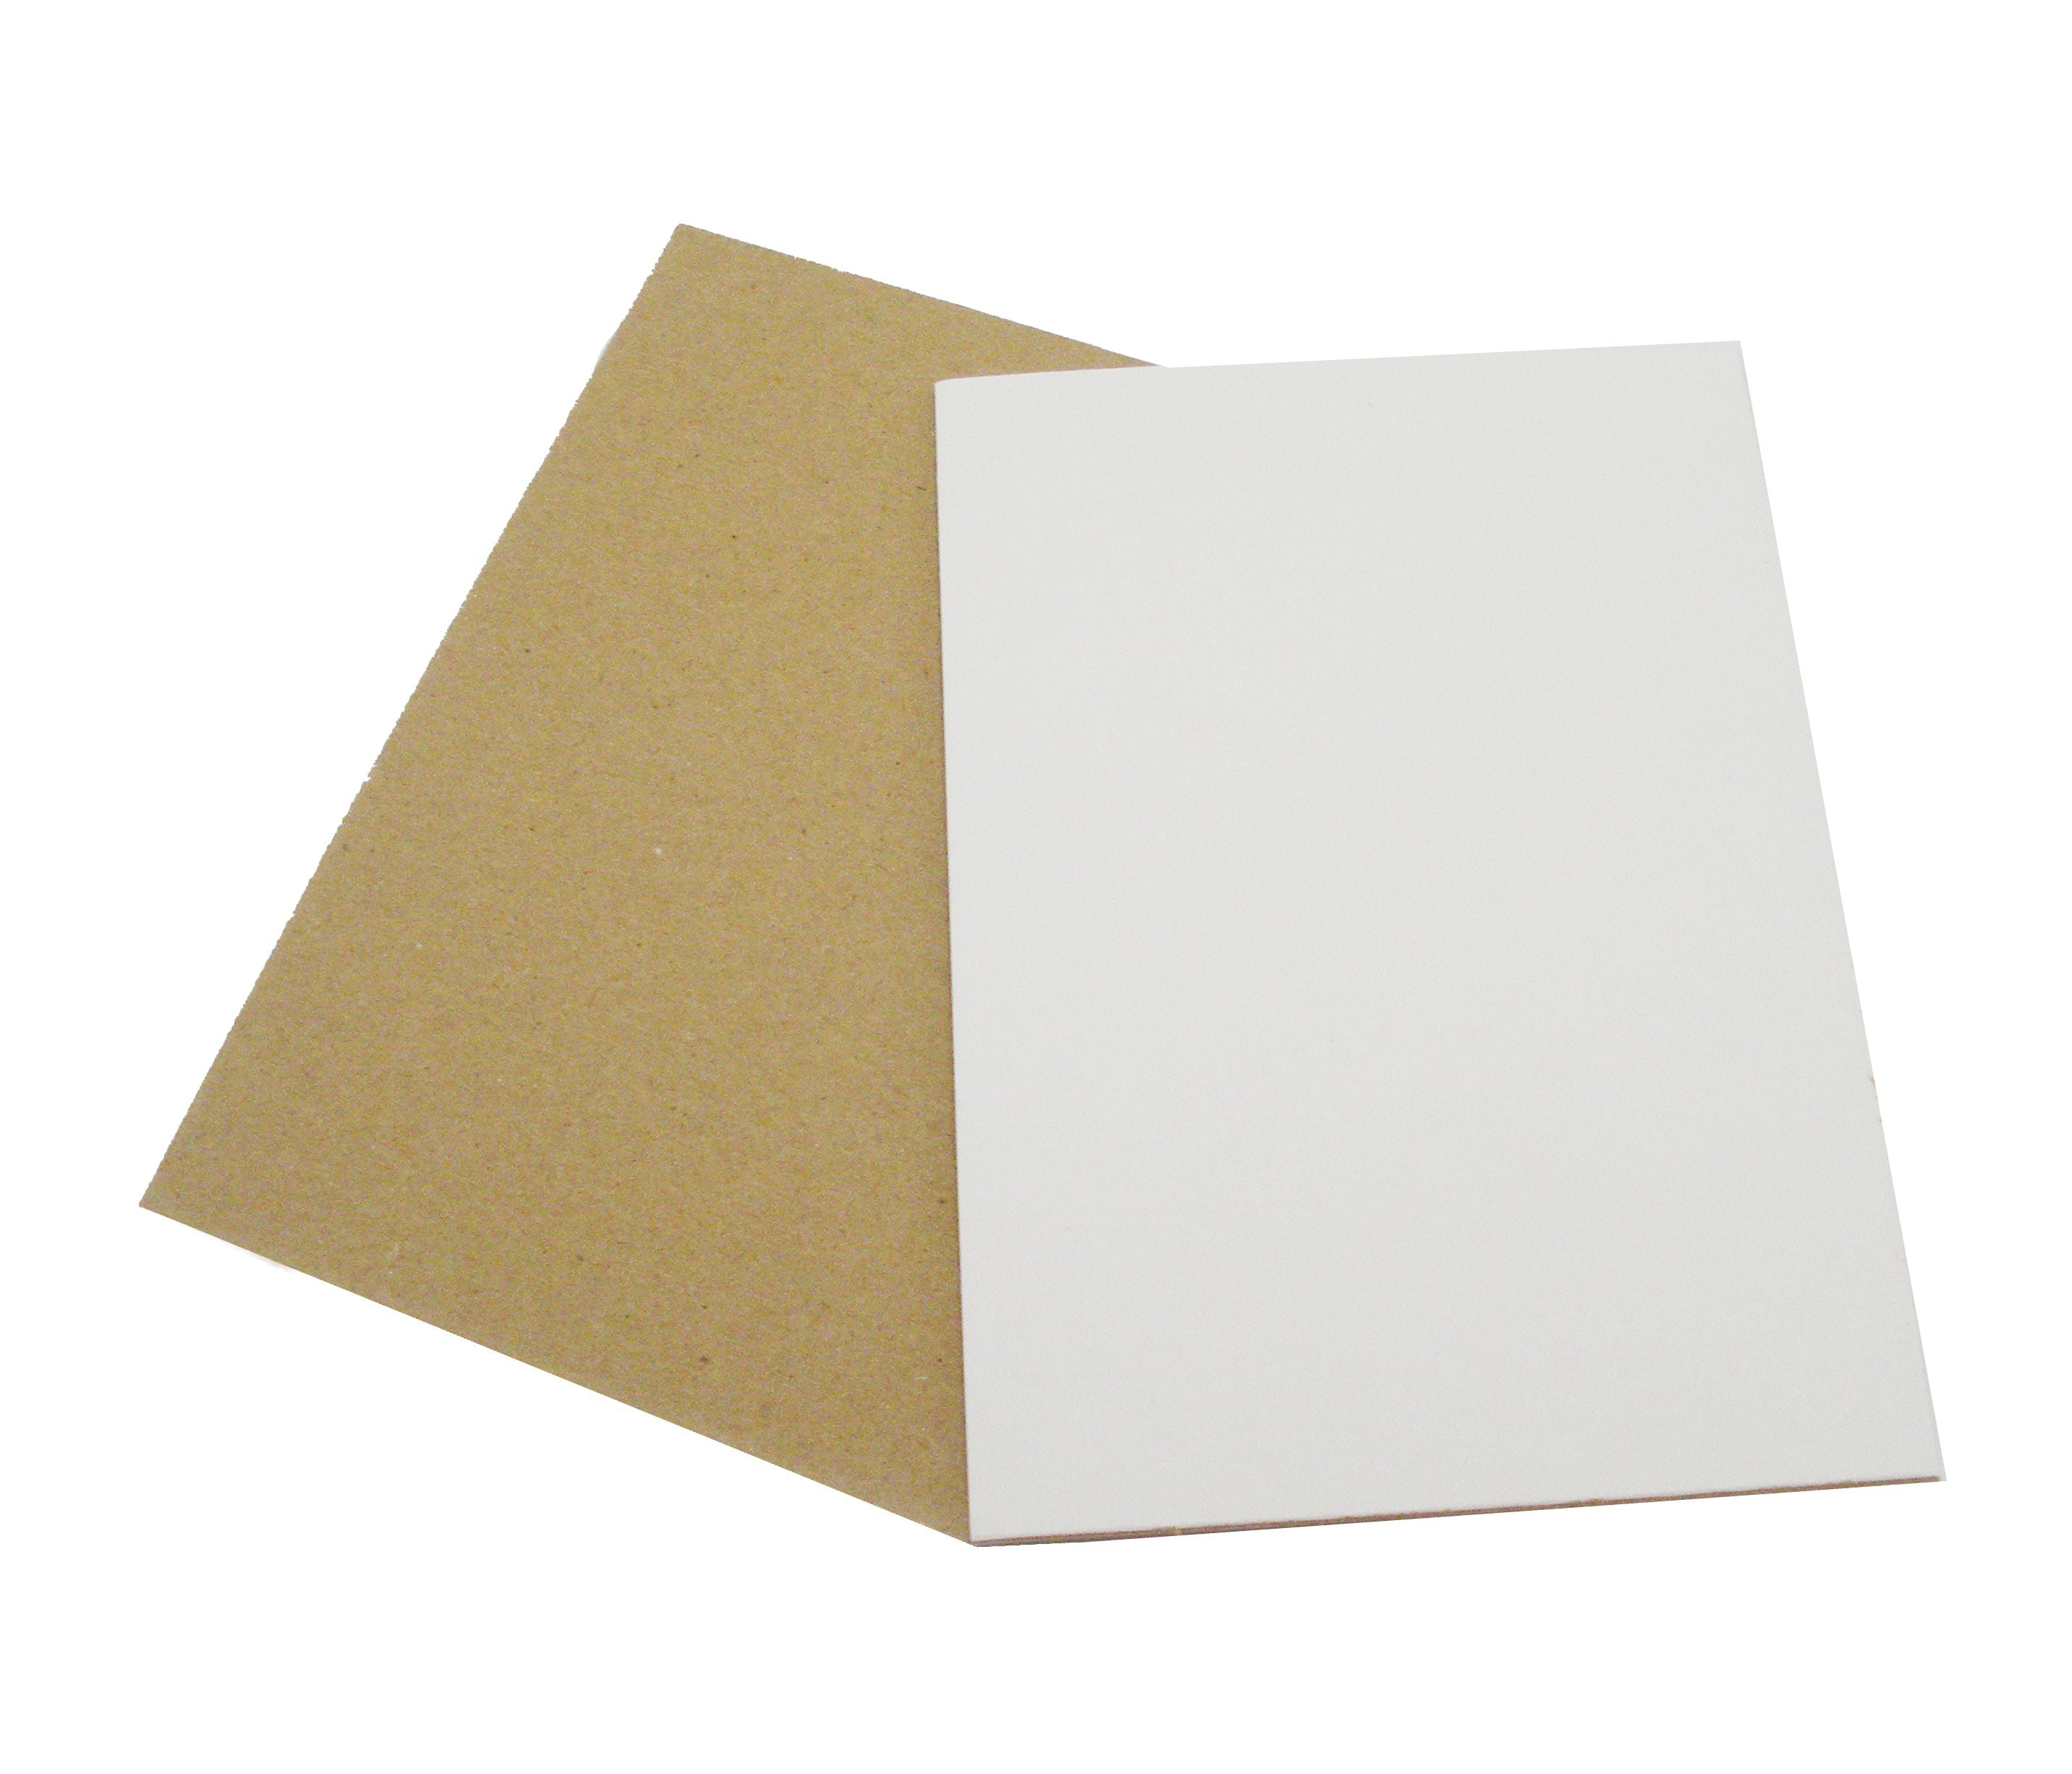 PINGEUI 50 Pack 8.5 x 11 Inches White Chipboard Sheets,40 PT White Chipboard, Medium Weight Cardboard Sheets for Scrapbook, A